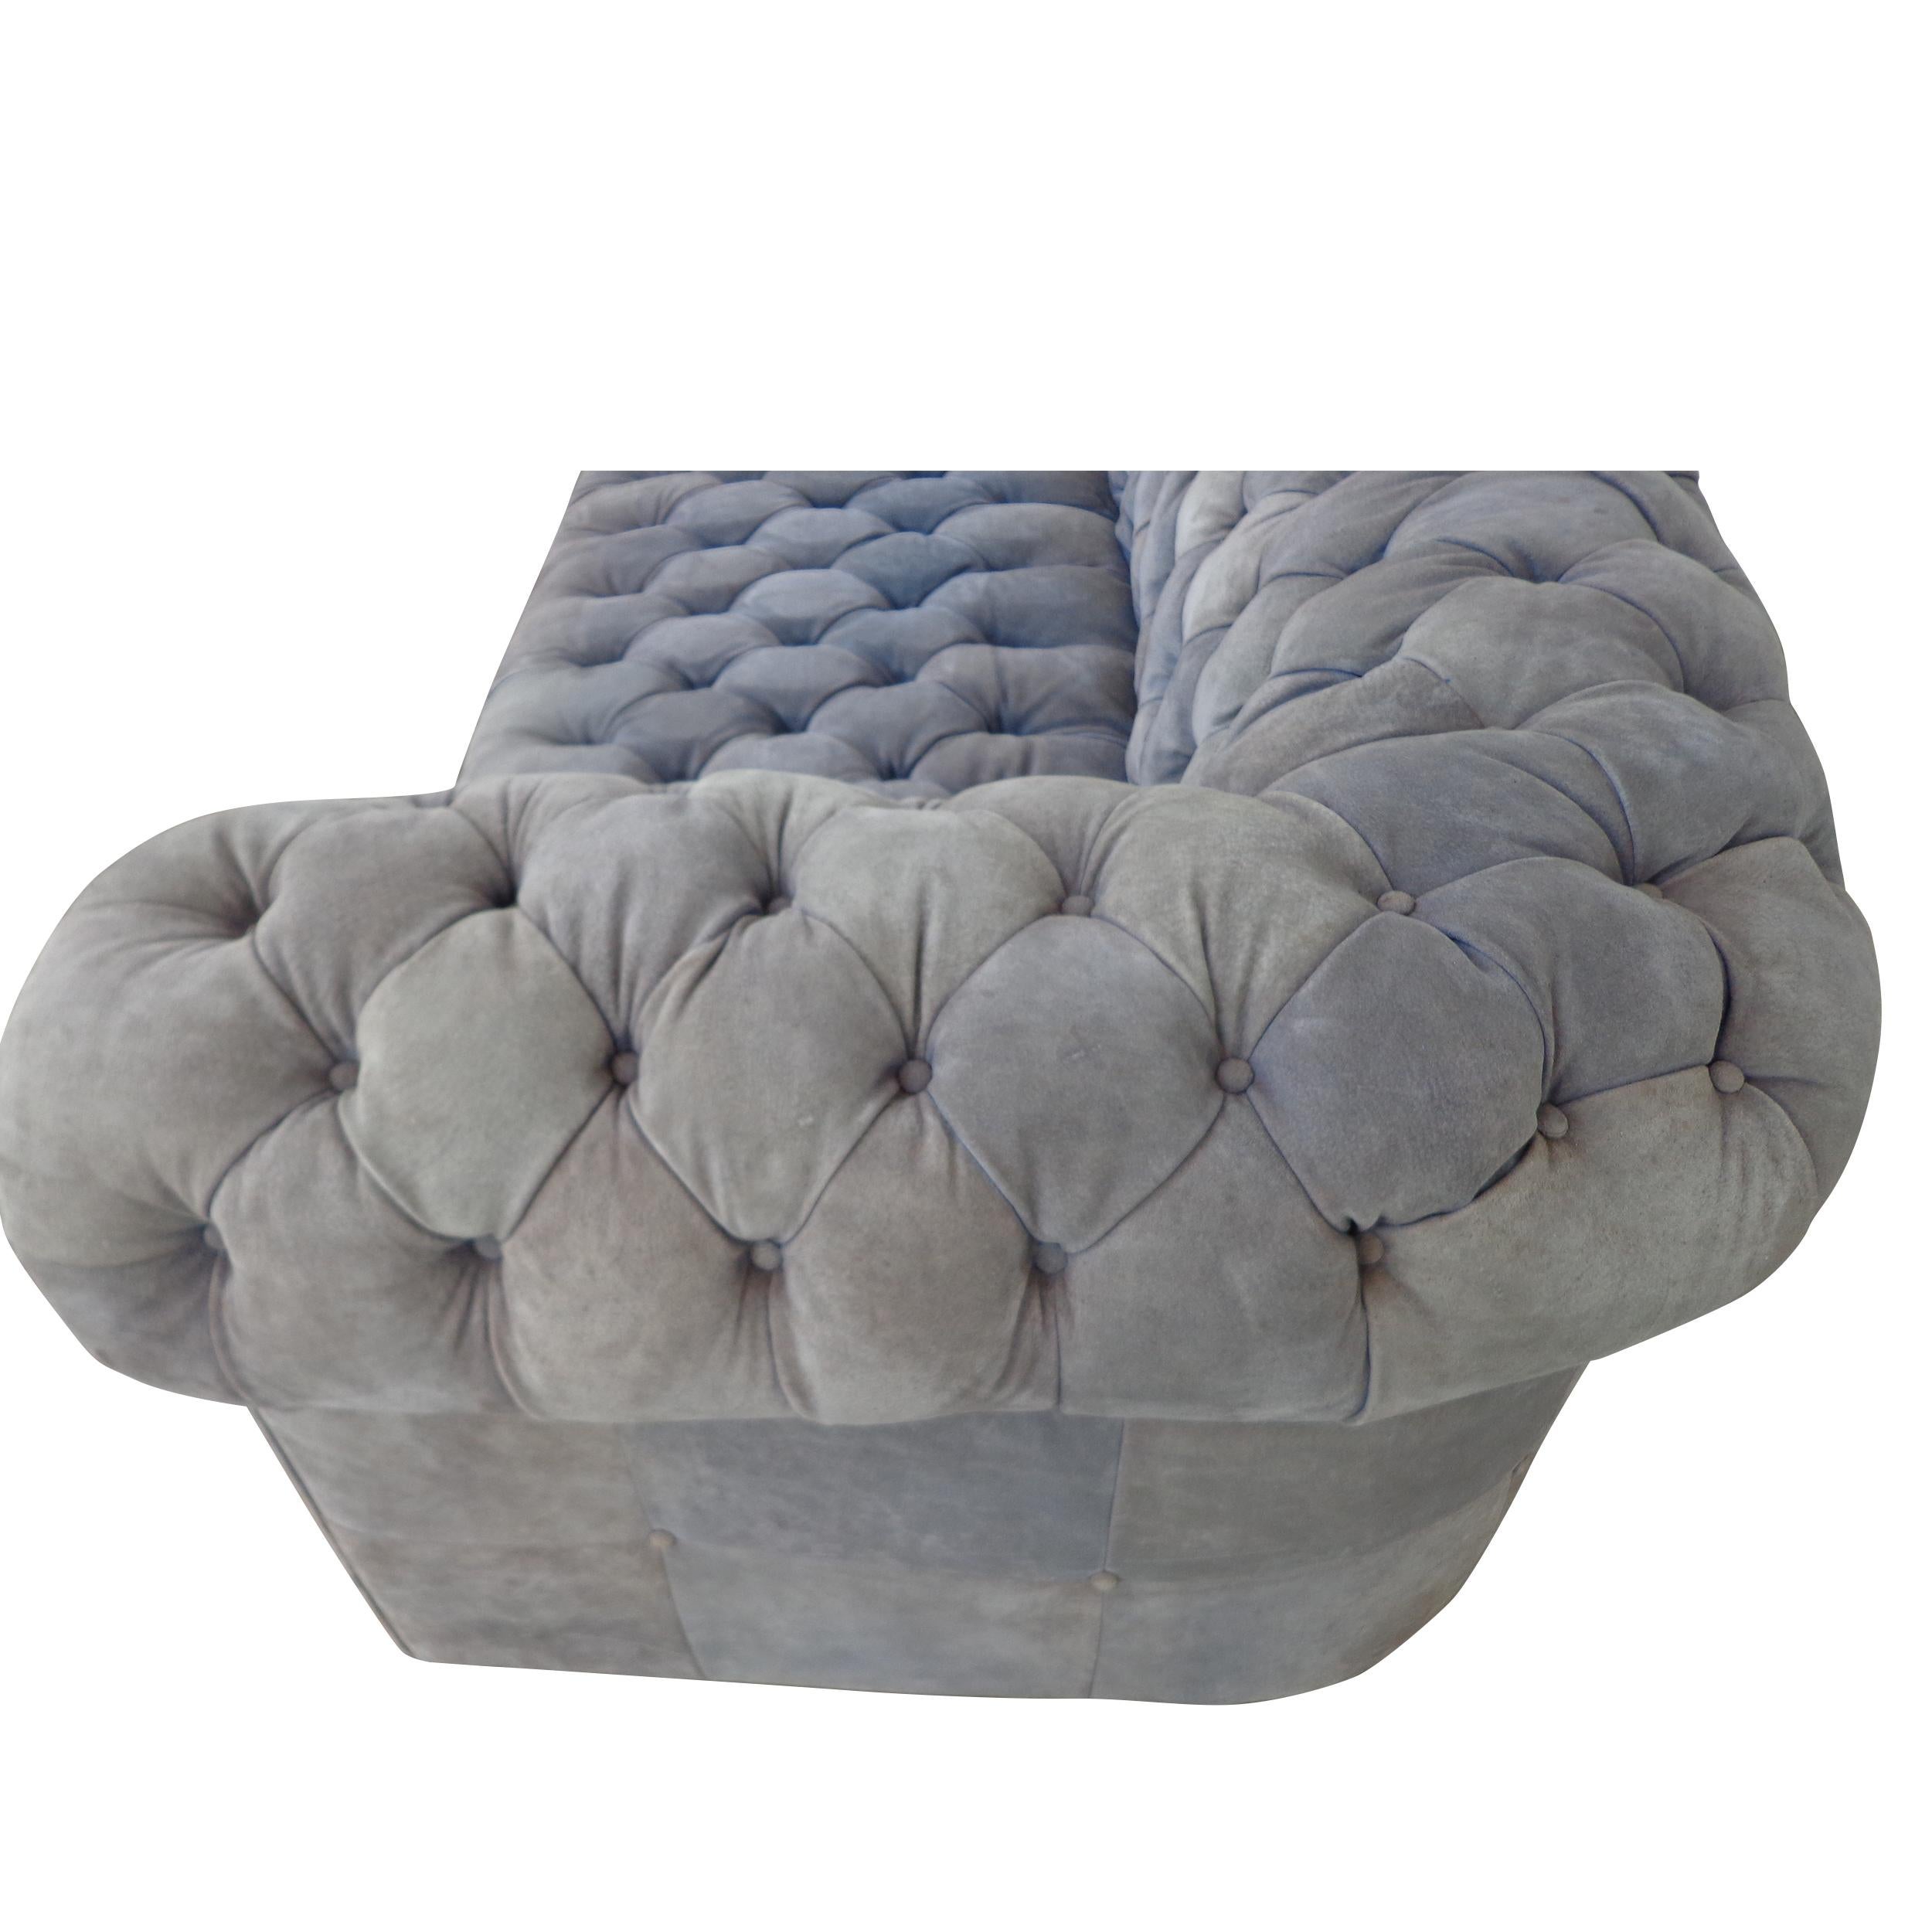 Dunbar Style Chesterfield tufted sofa in Suede

Sofa in Grey suede on a plinth base. Traditional button tufting. 
Reupholstery recommended.

Measures: Seat Height 17